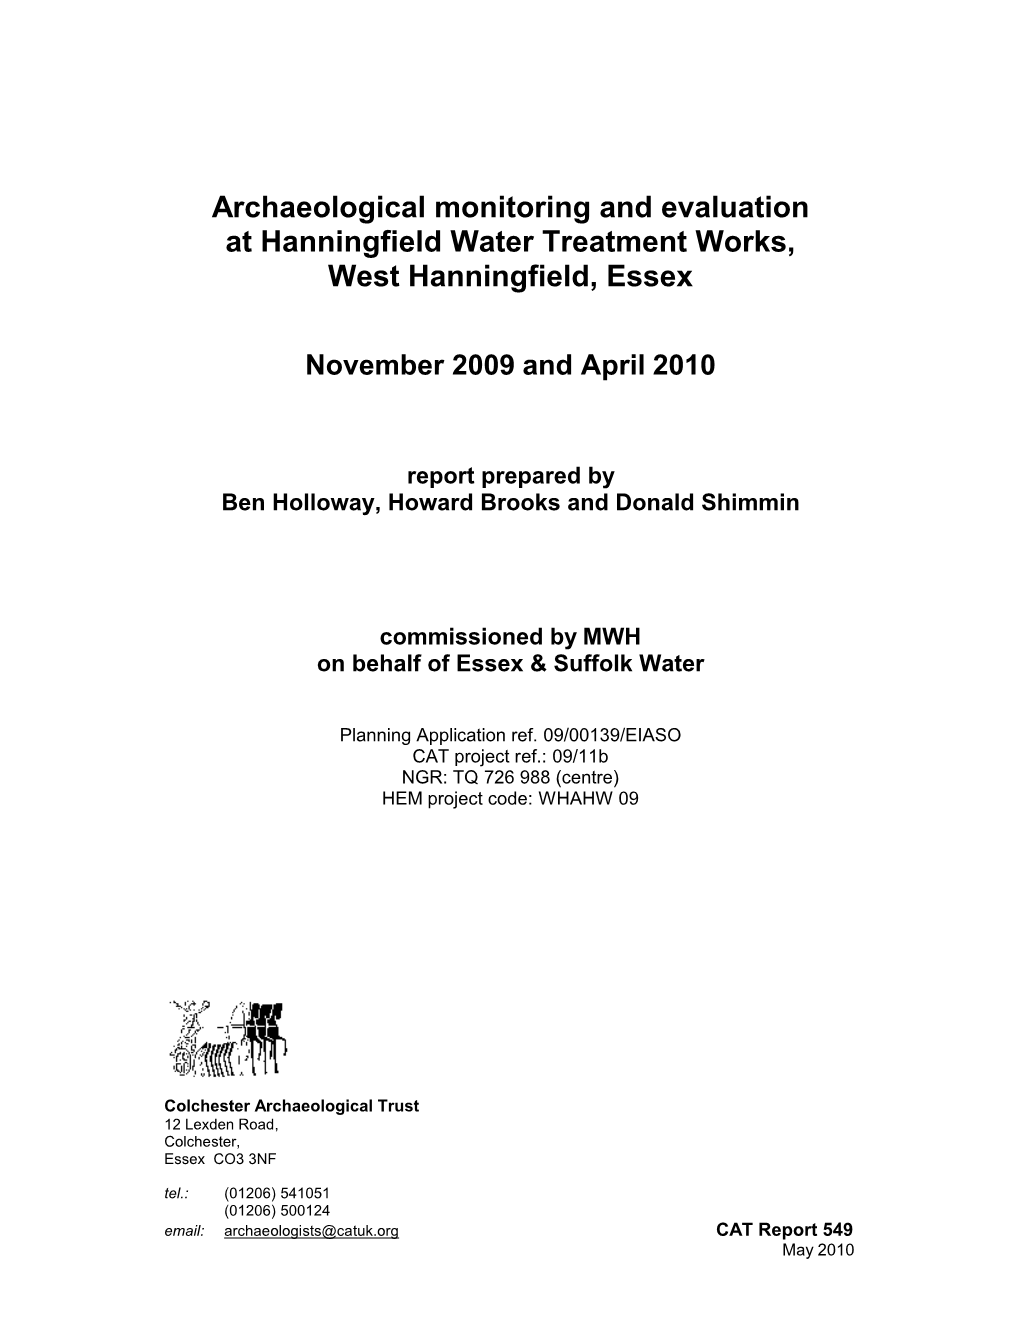 Archaeological Monitoring and Evaluation at Hanningfield Water Treatment Works, West Hanningfield, Essex